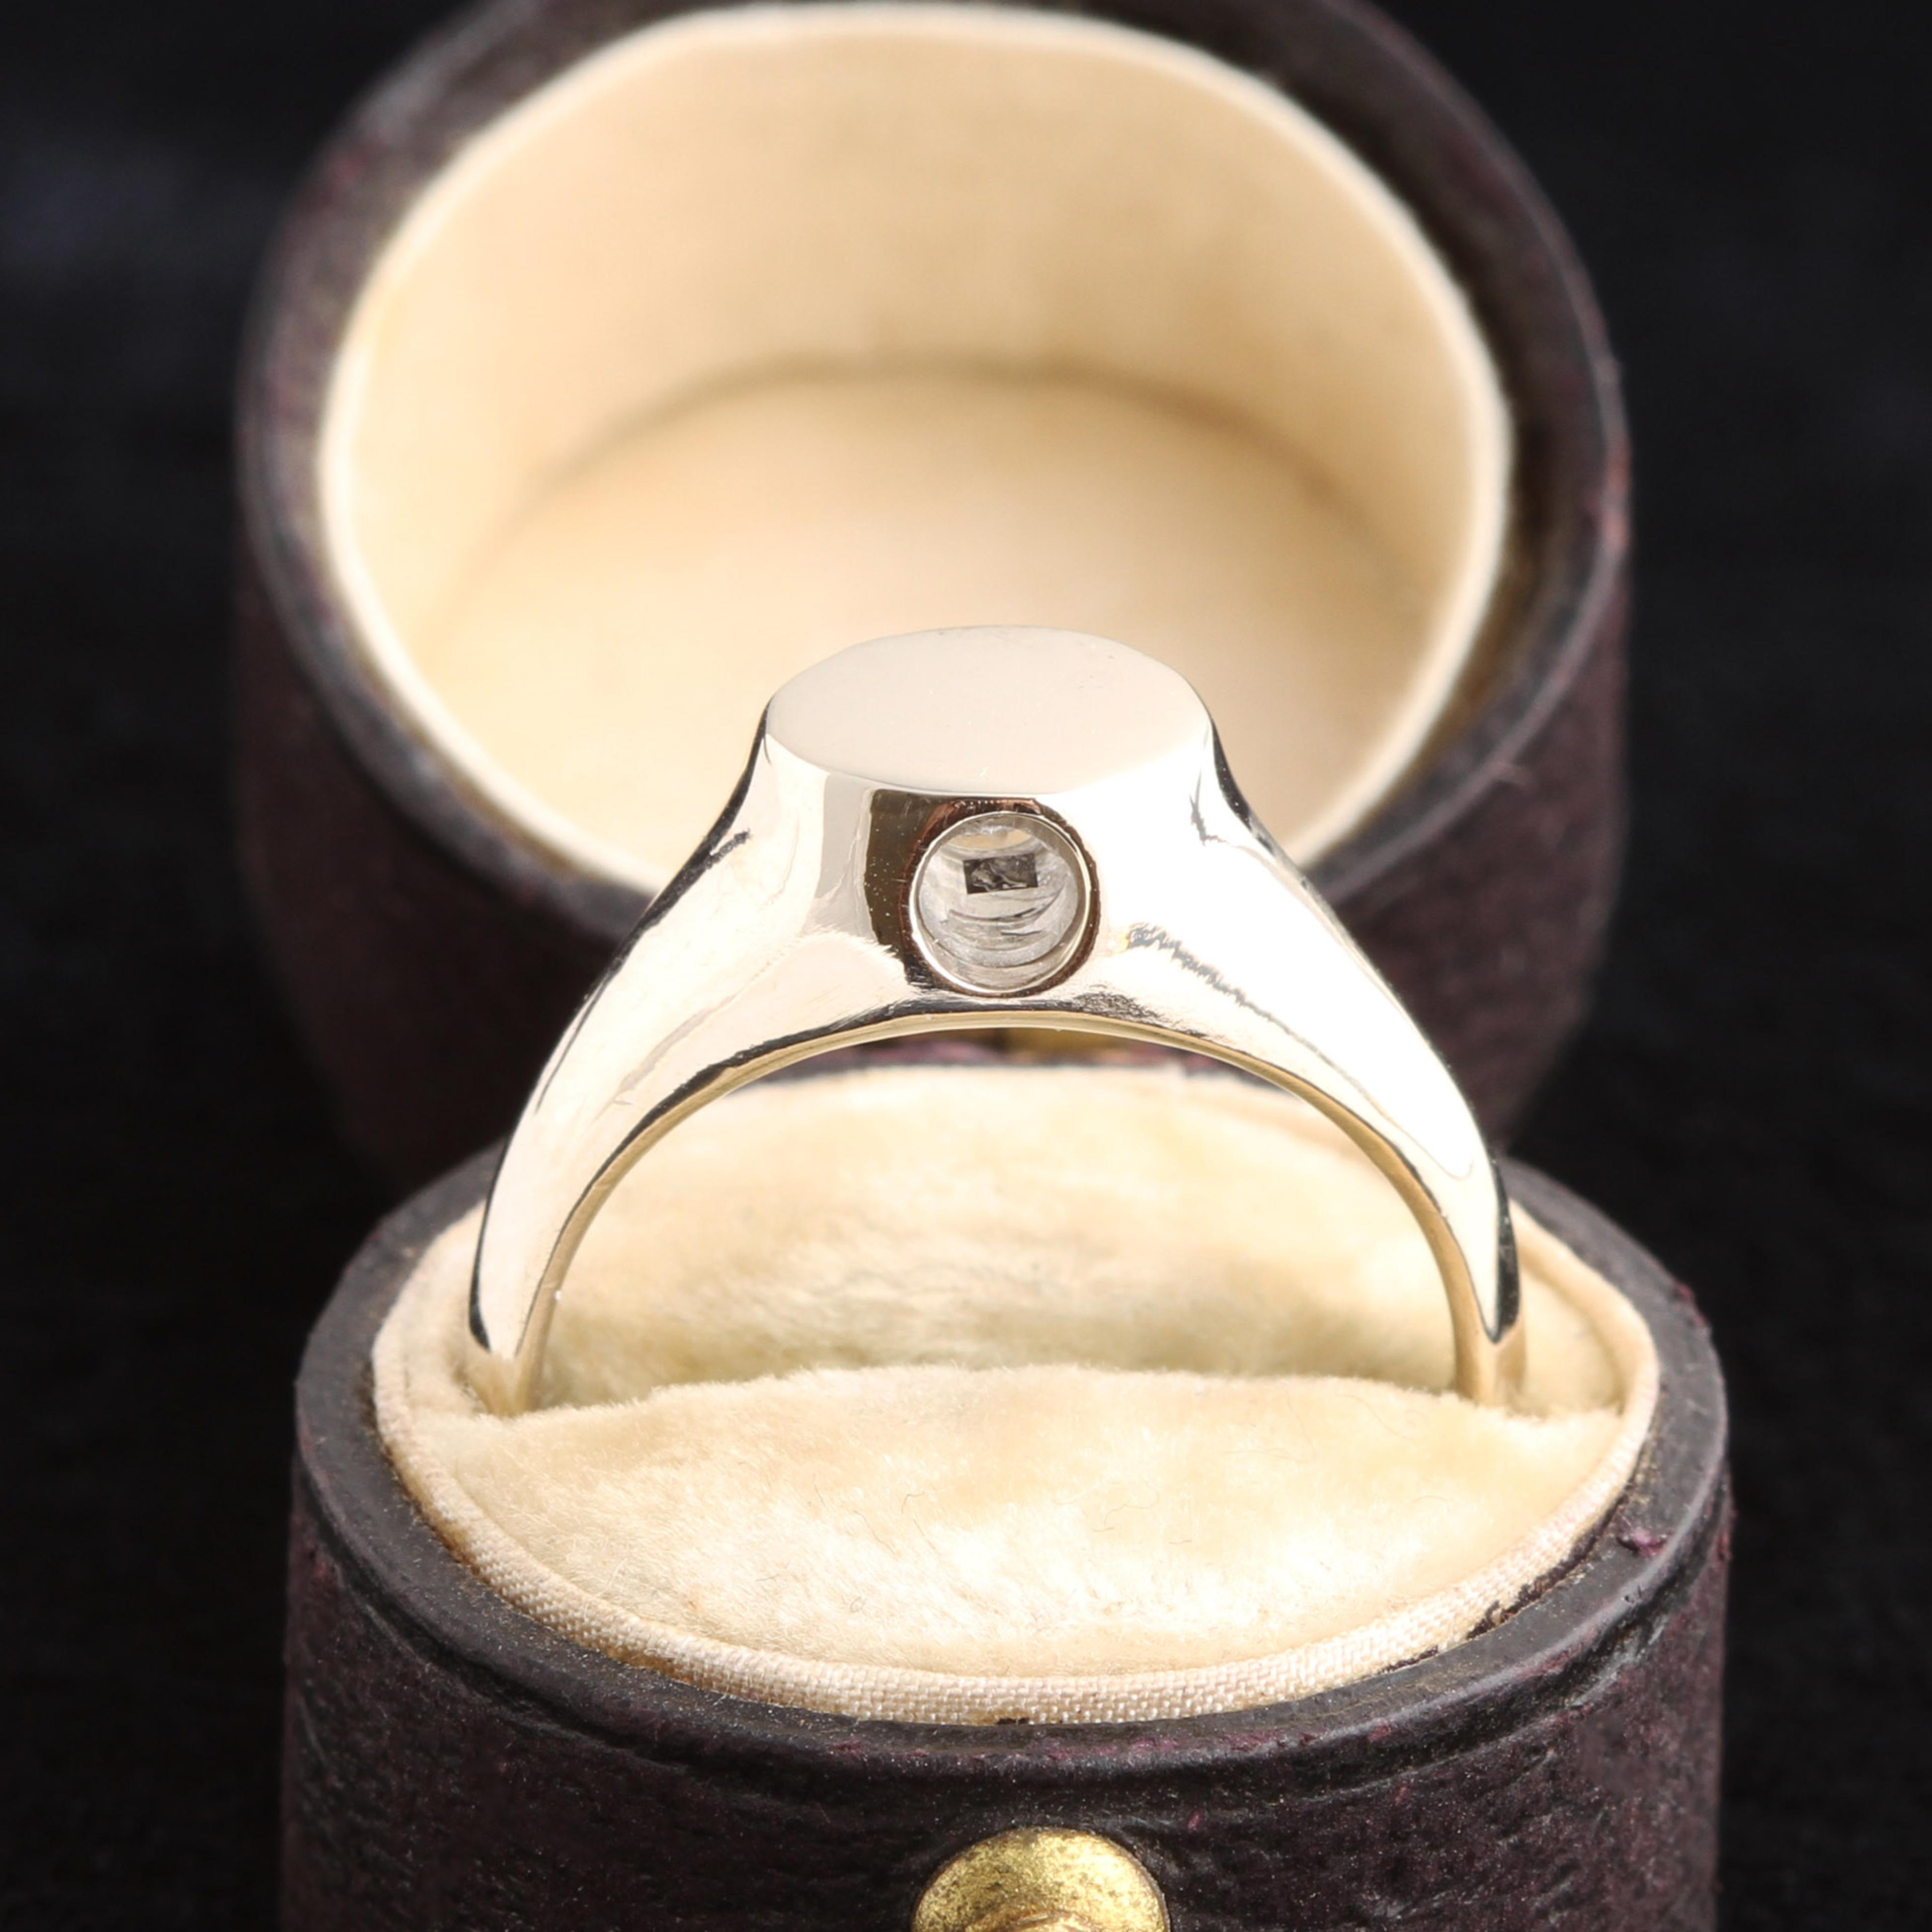 Photo of the white gold peep show ring in an antique box.